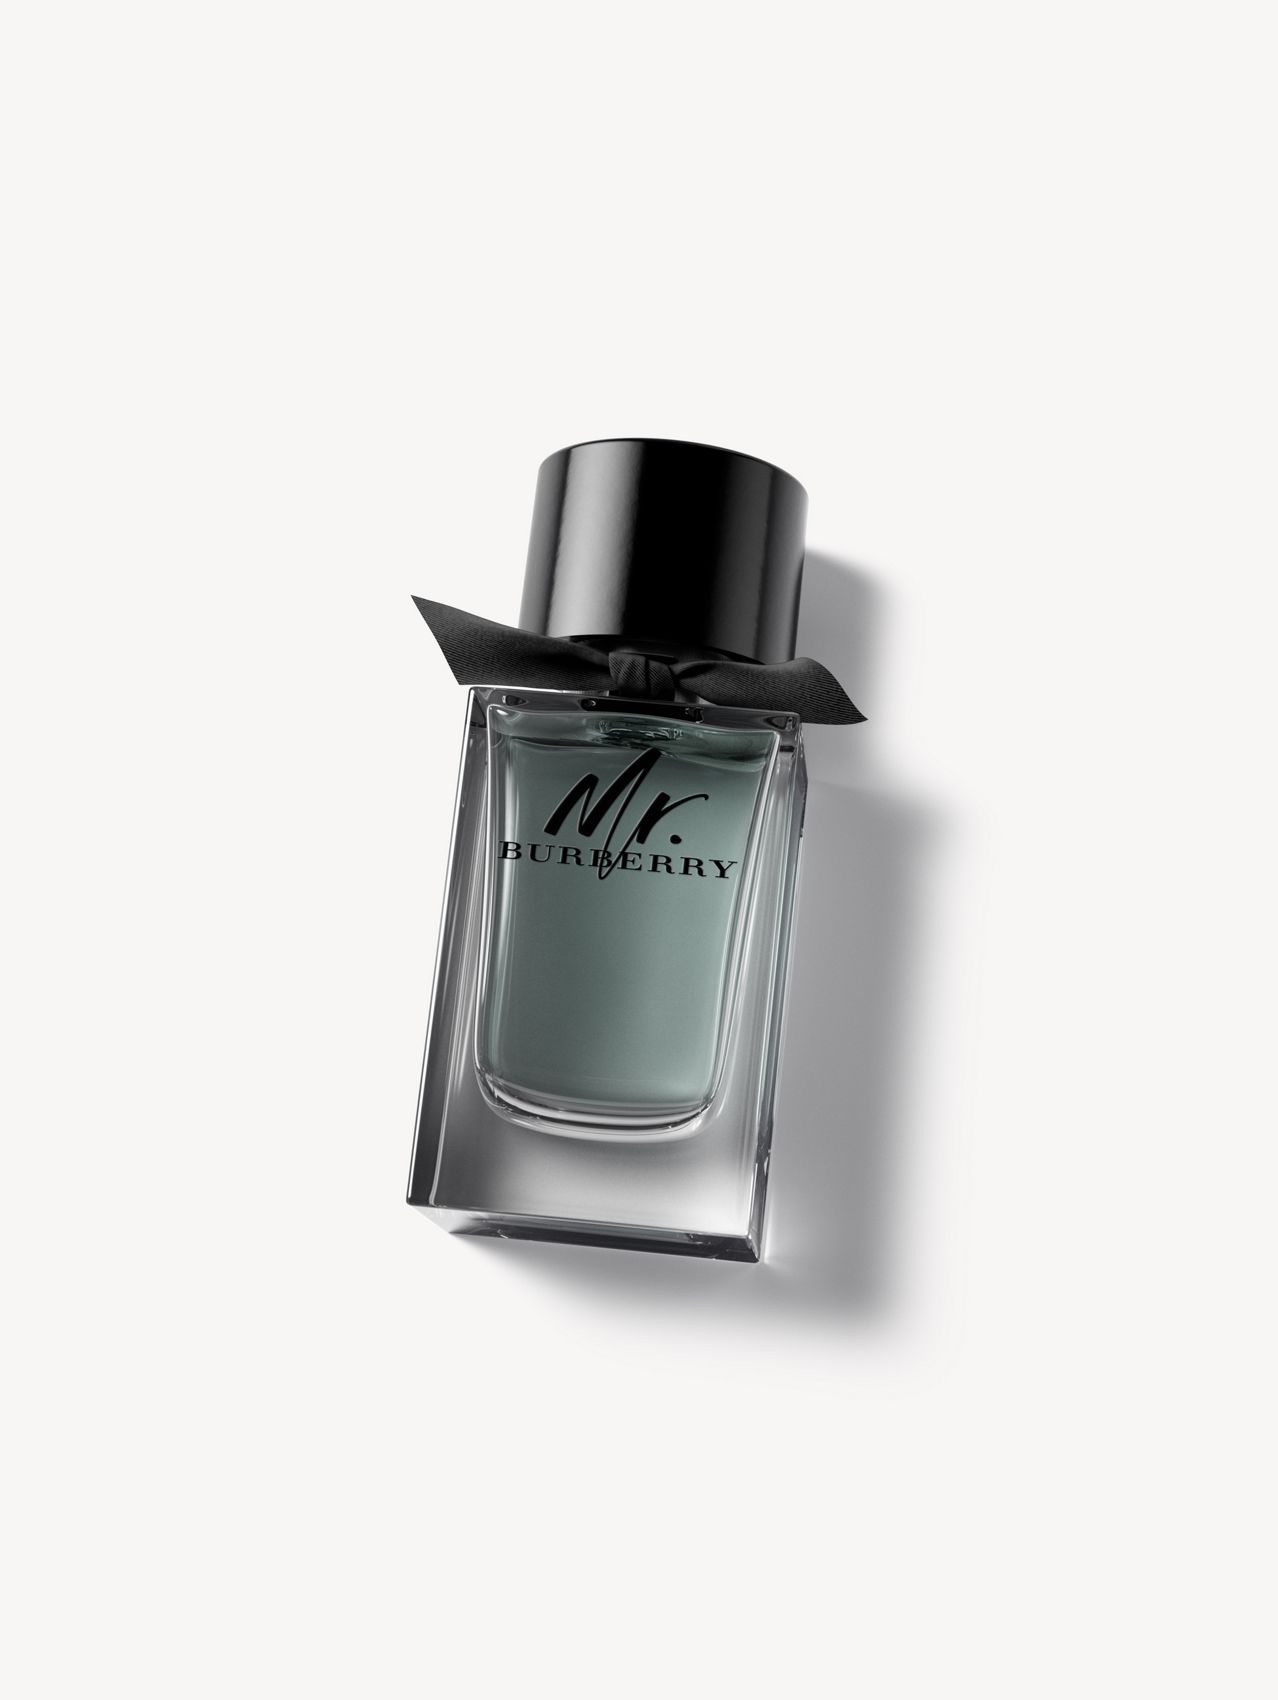 Detail Burberry Perfume Images Nomer 4